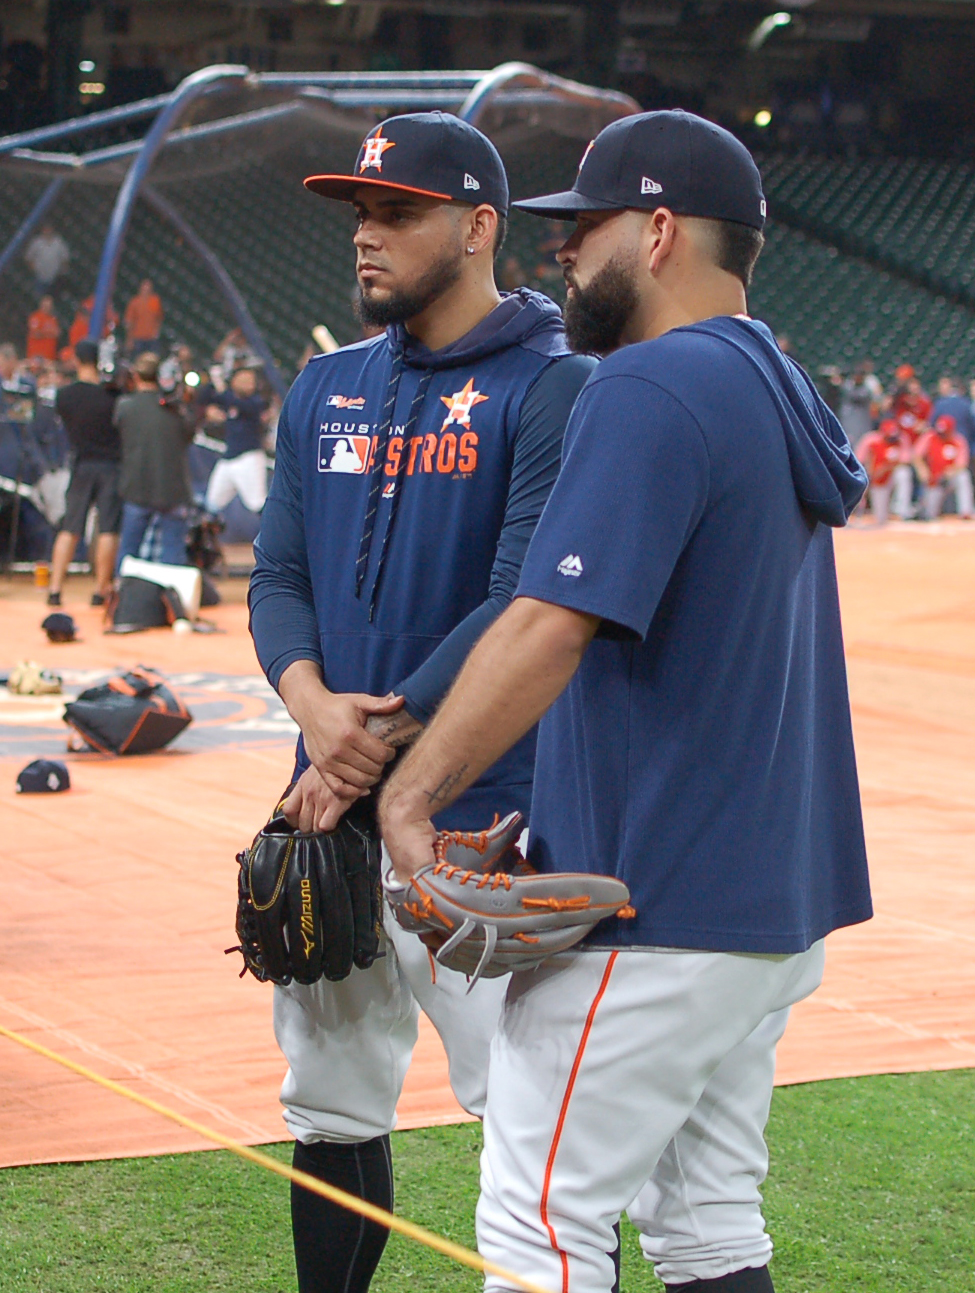 See Astros' players Roberto Osuna, José Urquidy in this photo from